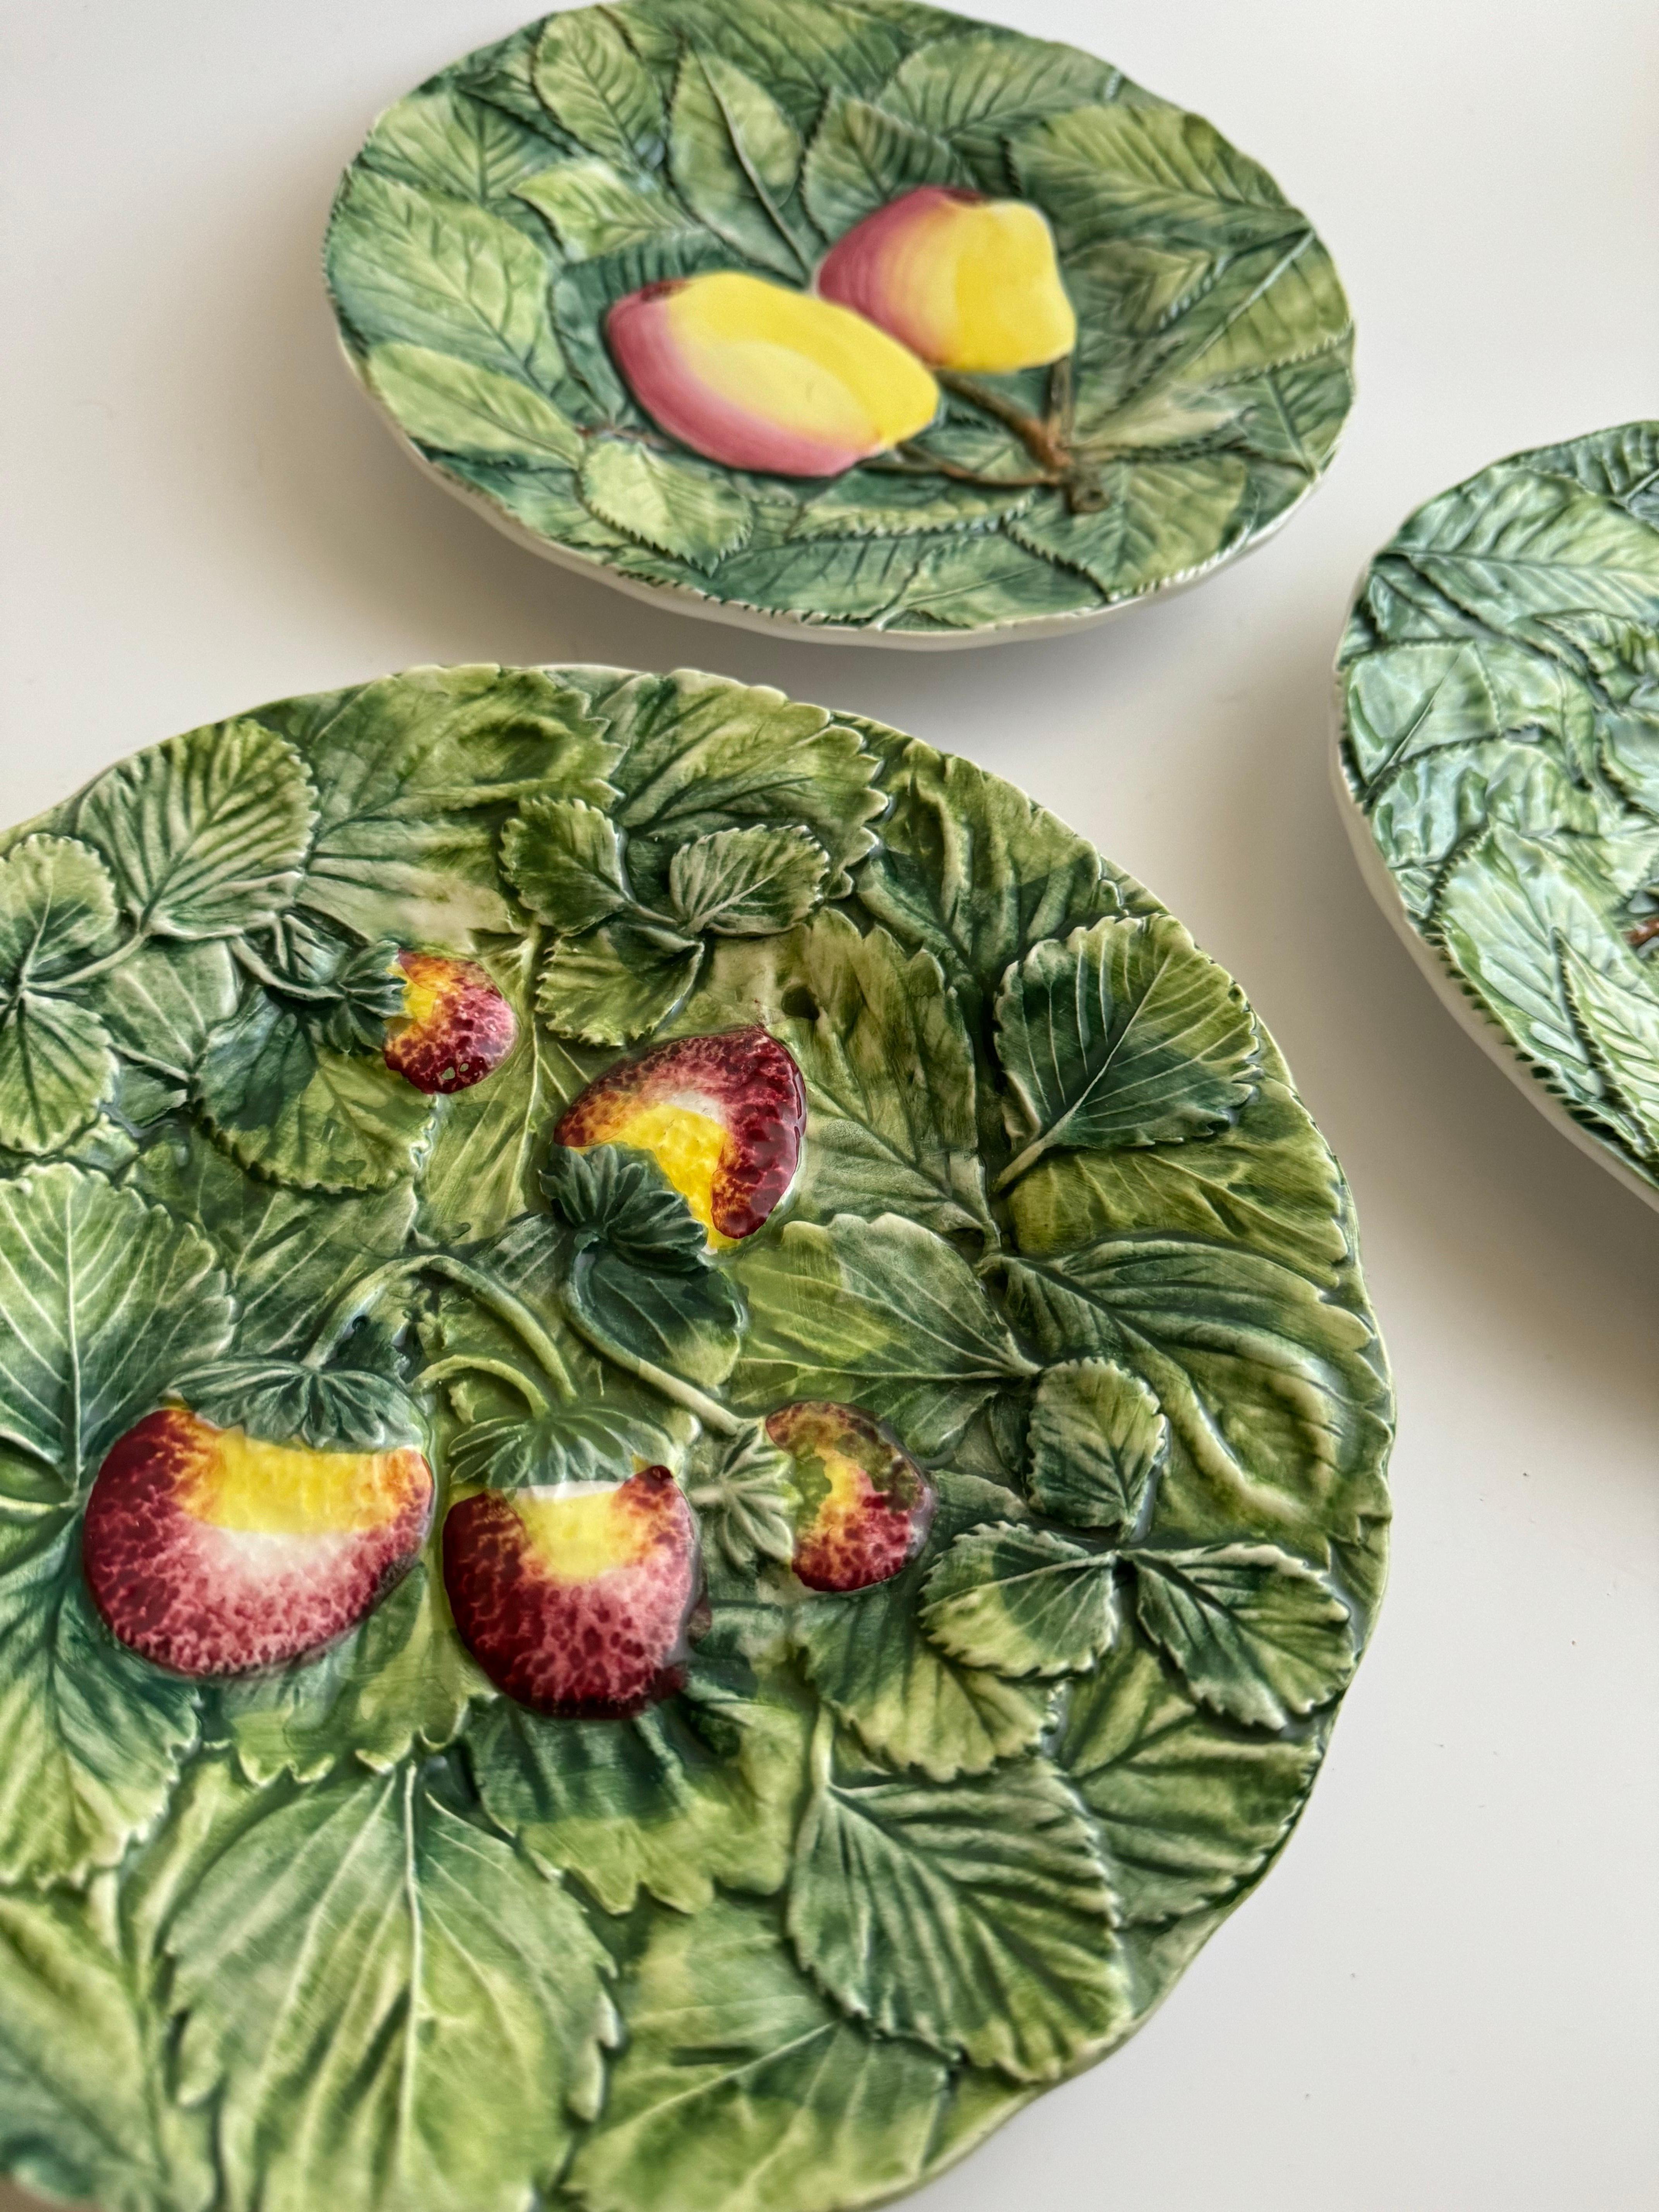 Set of three vintage Italian Majolica plates, each featuring a different embossed fruit design on a green leafy background. These decorative plates are from the 1980s and measure 13 inches in diameter. They appear to be in excellent condition